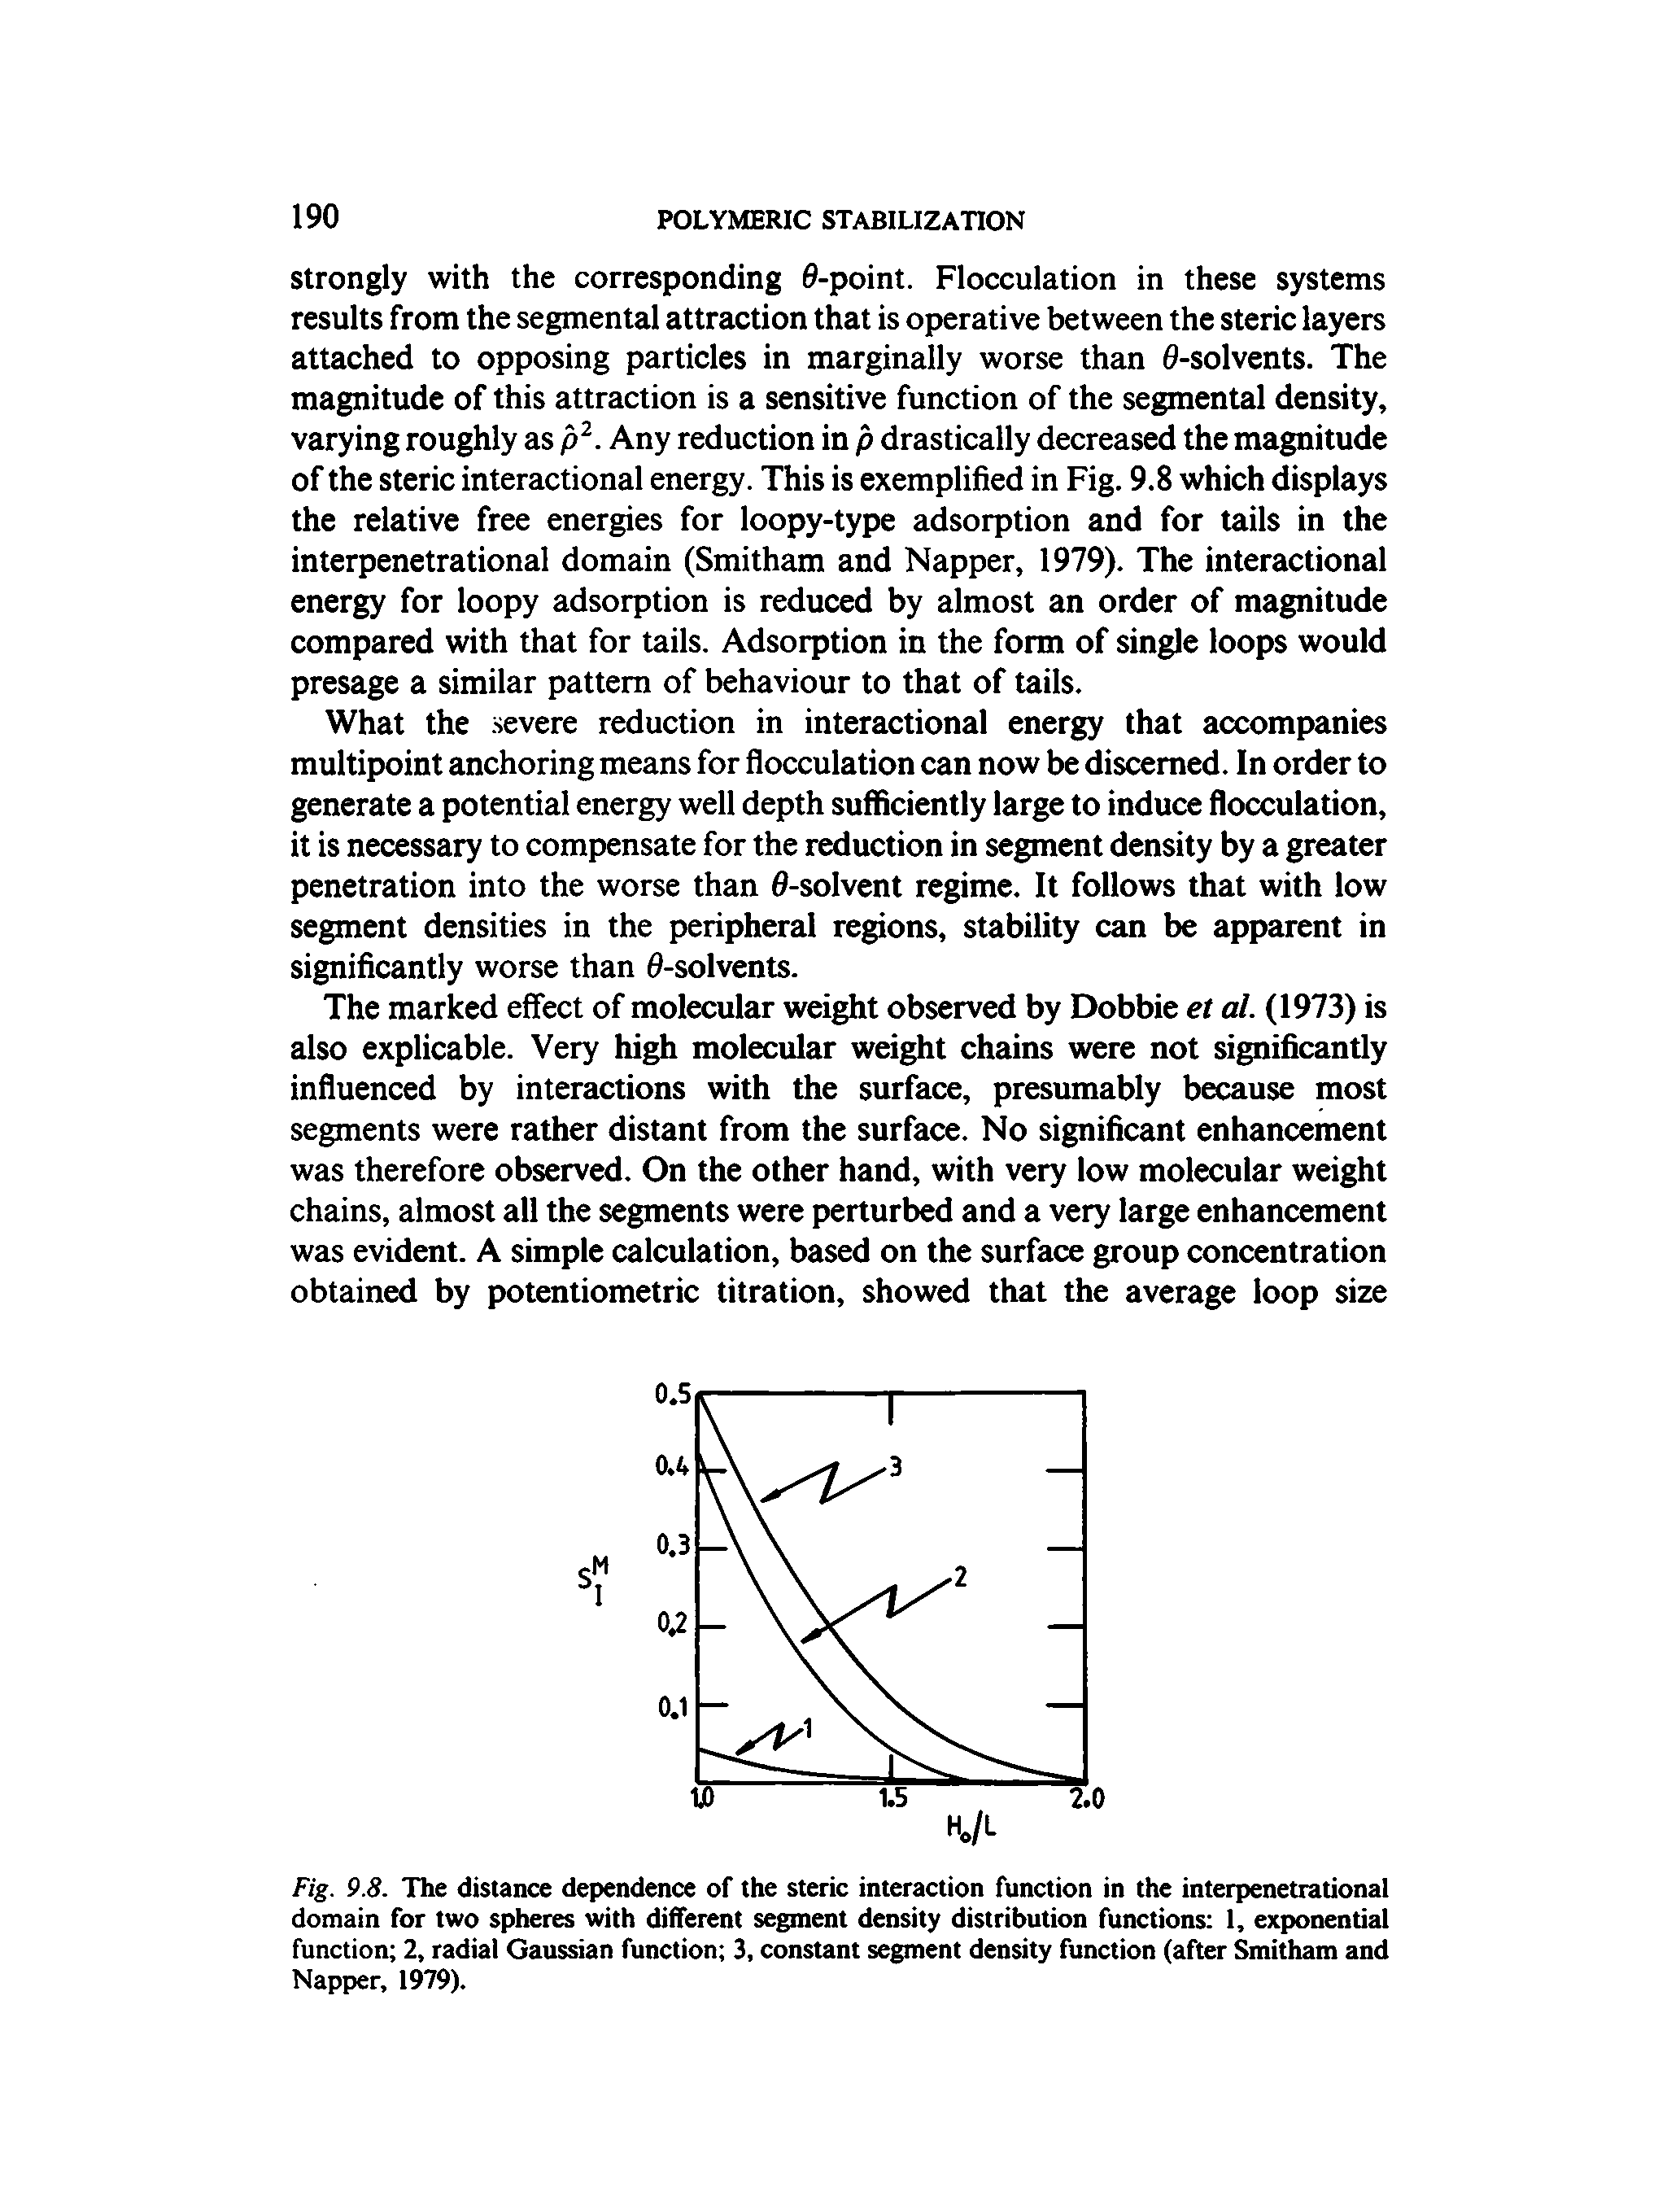 Fig. 9.8. The distance dependence of the steric interaction function in the interpenetrational domain for two spheres with different segment density distribution functions I, exponential function 2, radial Gaus n function 3, constant segment density function (after Smitham and Napper, 1979).